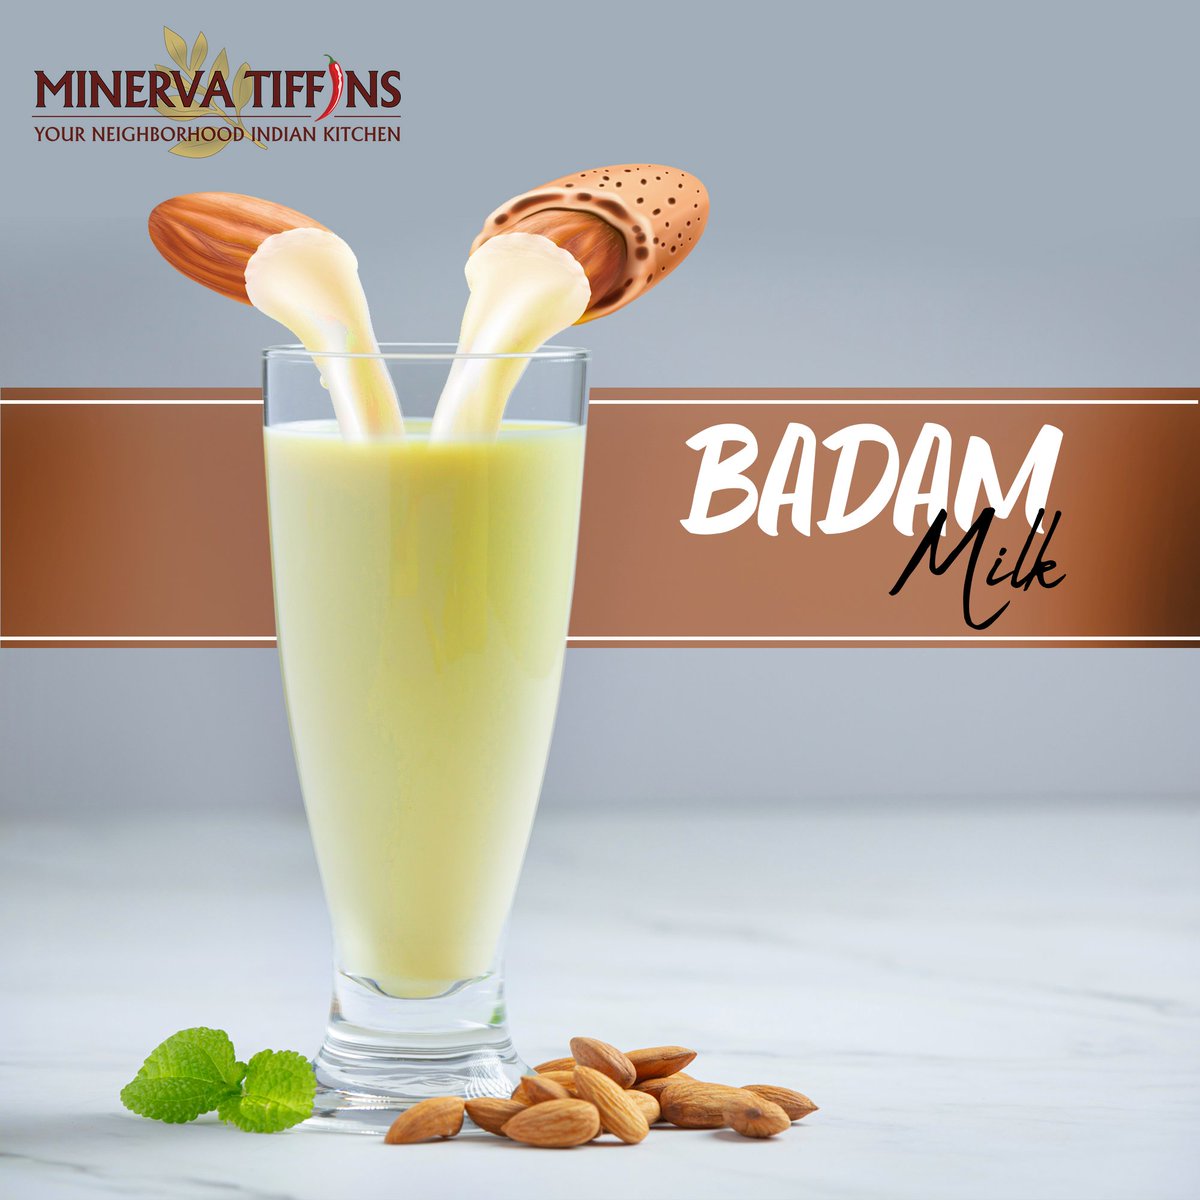 Indulge in the creamy, nutty goodness of our Badam milk! Made with a blend of rich almonds and milk, it's the perfect drink for a boost of nourishment. 

#minervatiffins #minervafoods #badammilk #badam #almondmilk #almond #nourishment #nutrition #healthy💁🏻🇮🇳 🇨🇦